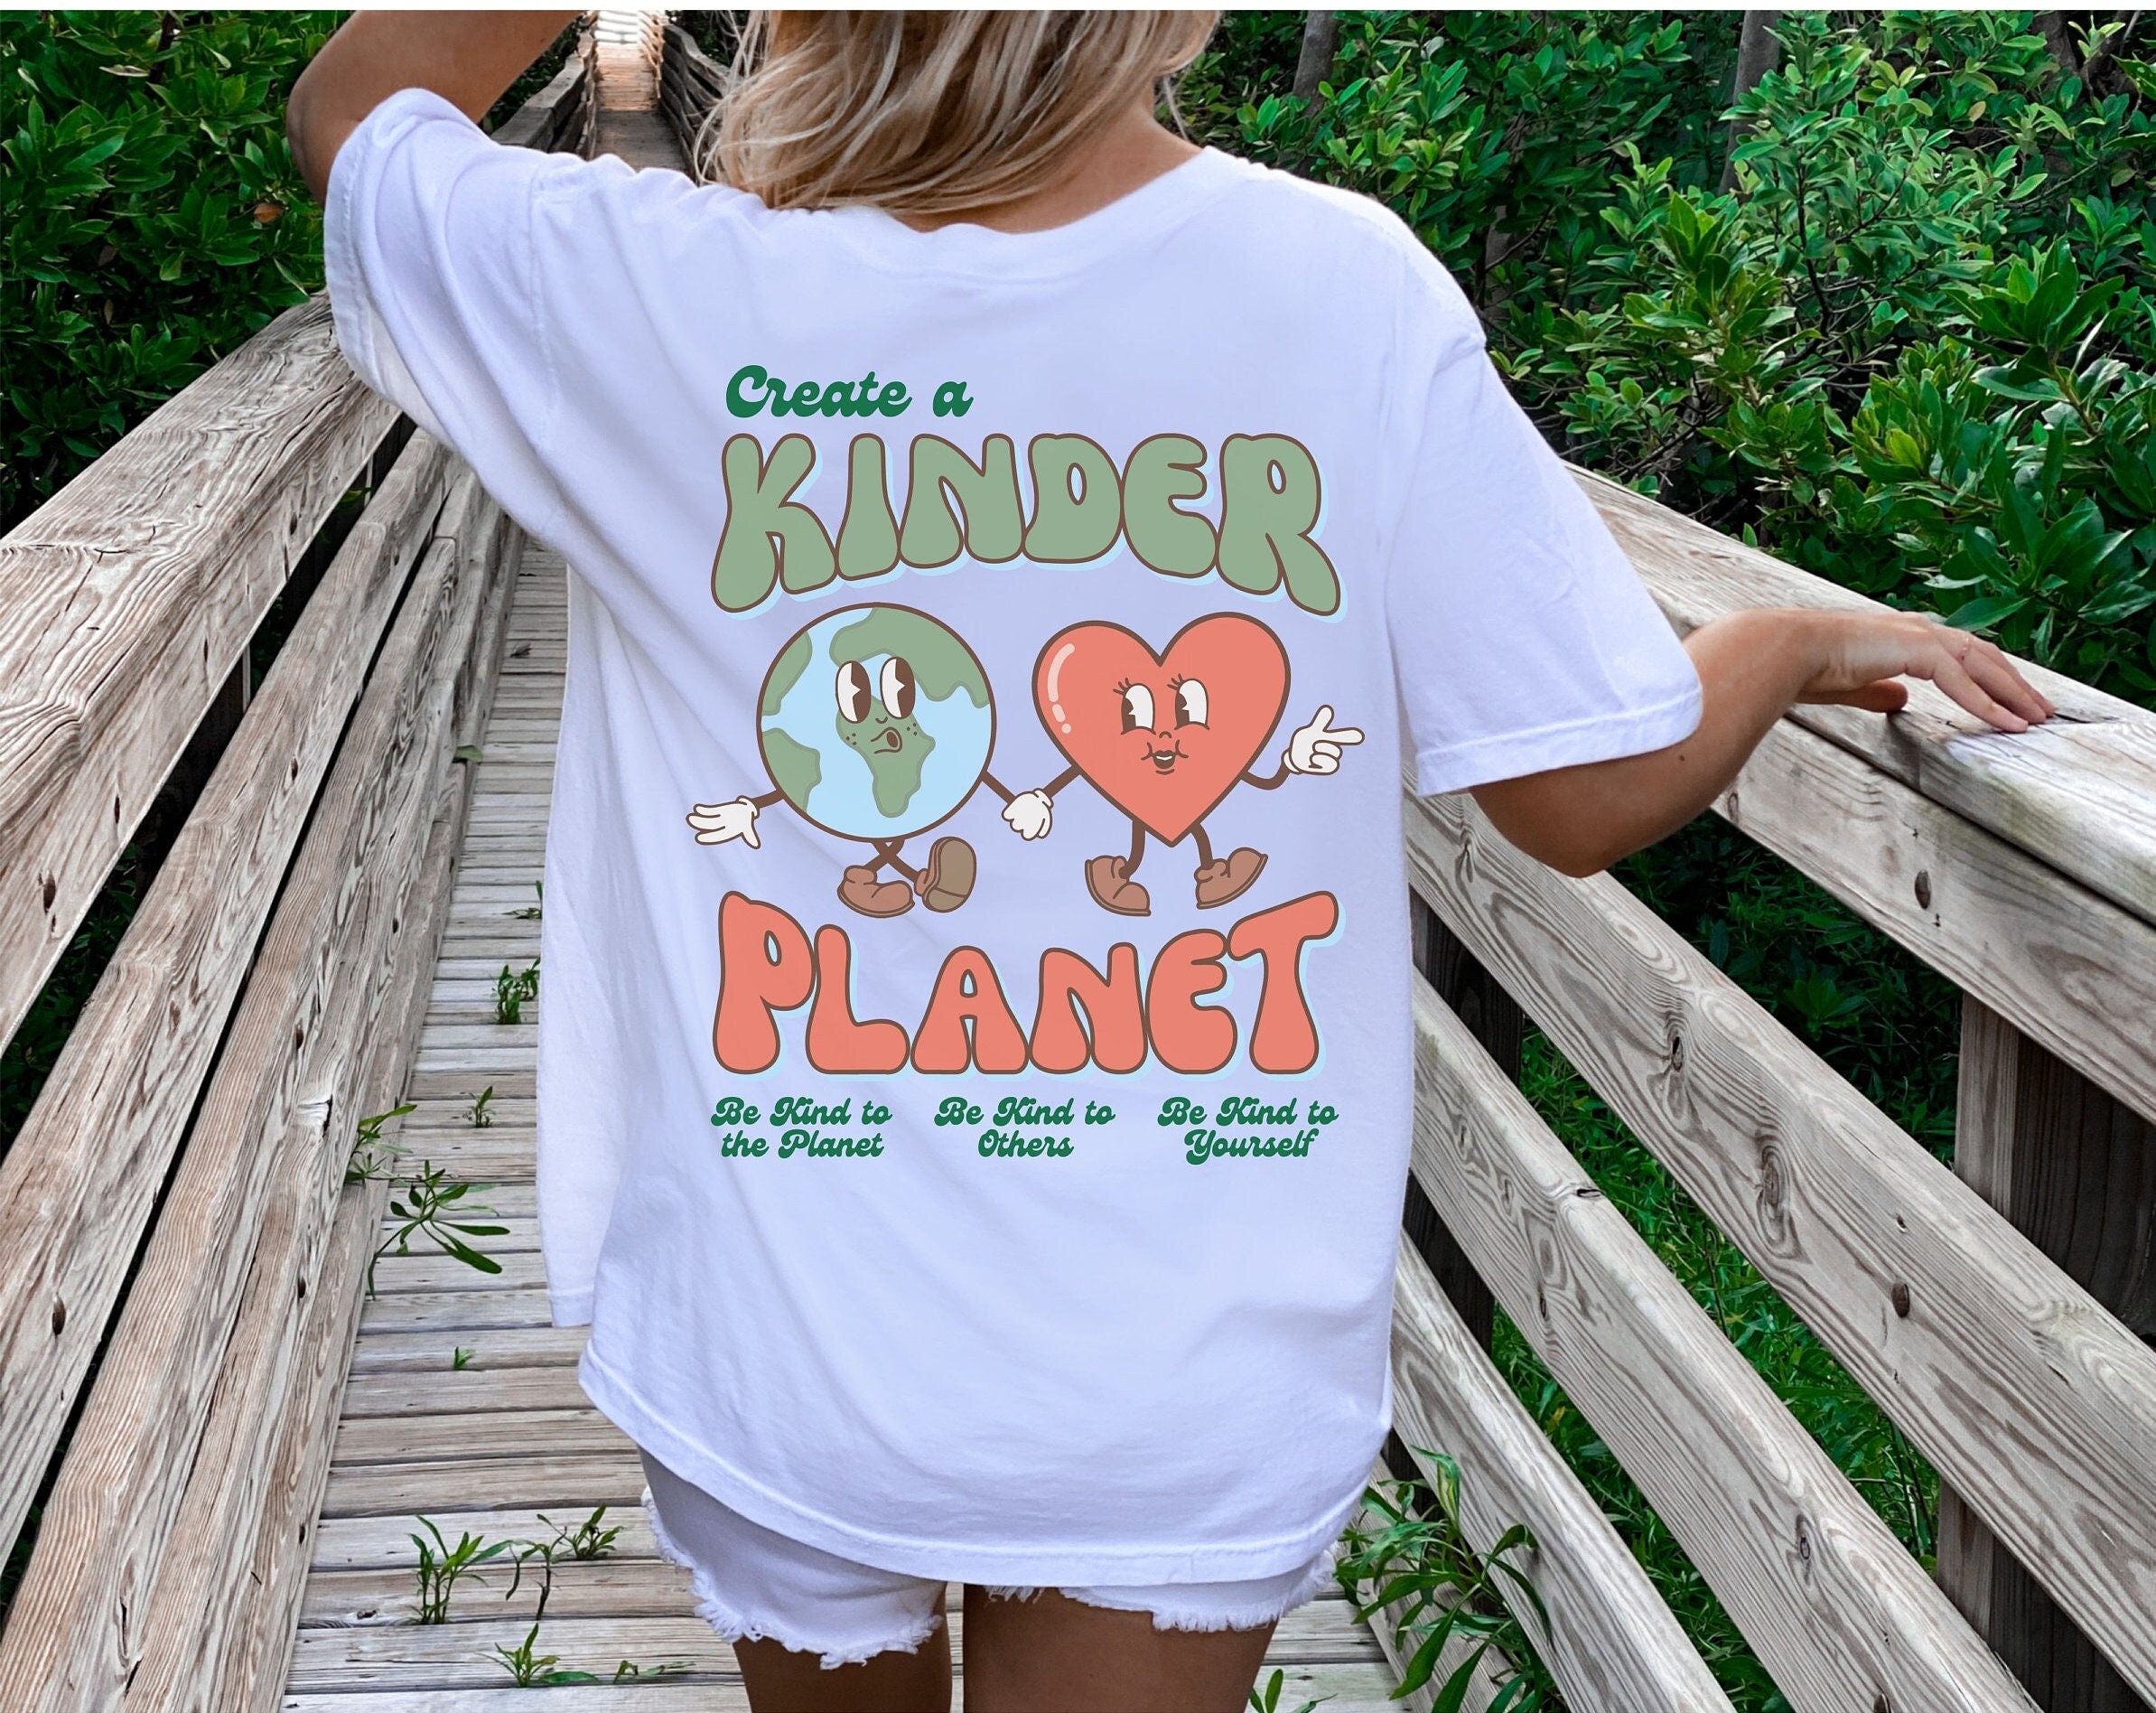 Kinder Planet Shirt Granola Girl Tshirt Tumblr Shirts Preppy Clothes Trendy  Clothes VSCO Teens Aesthetic Clothing Wear Oversized Y2K 